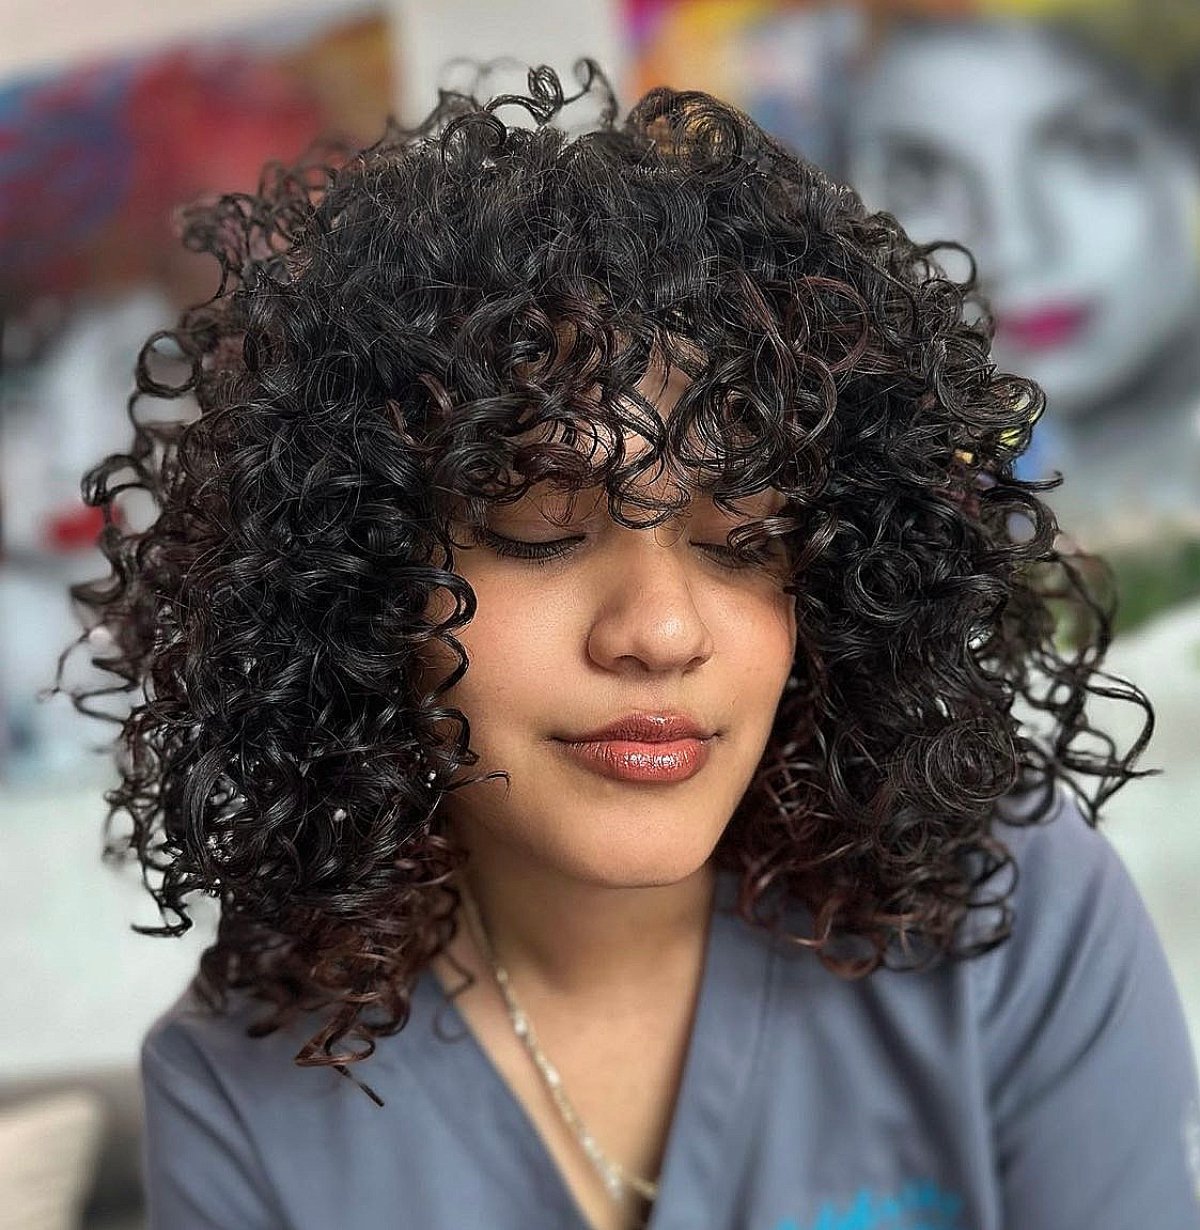 Curly brunette Cadō cut with dense ringlets and natural hair volume